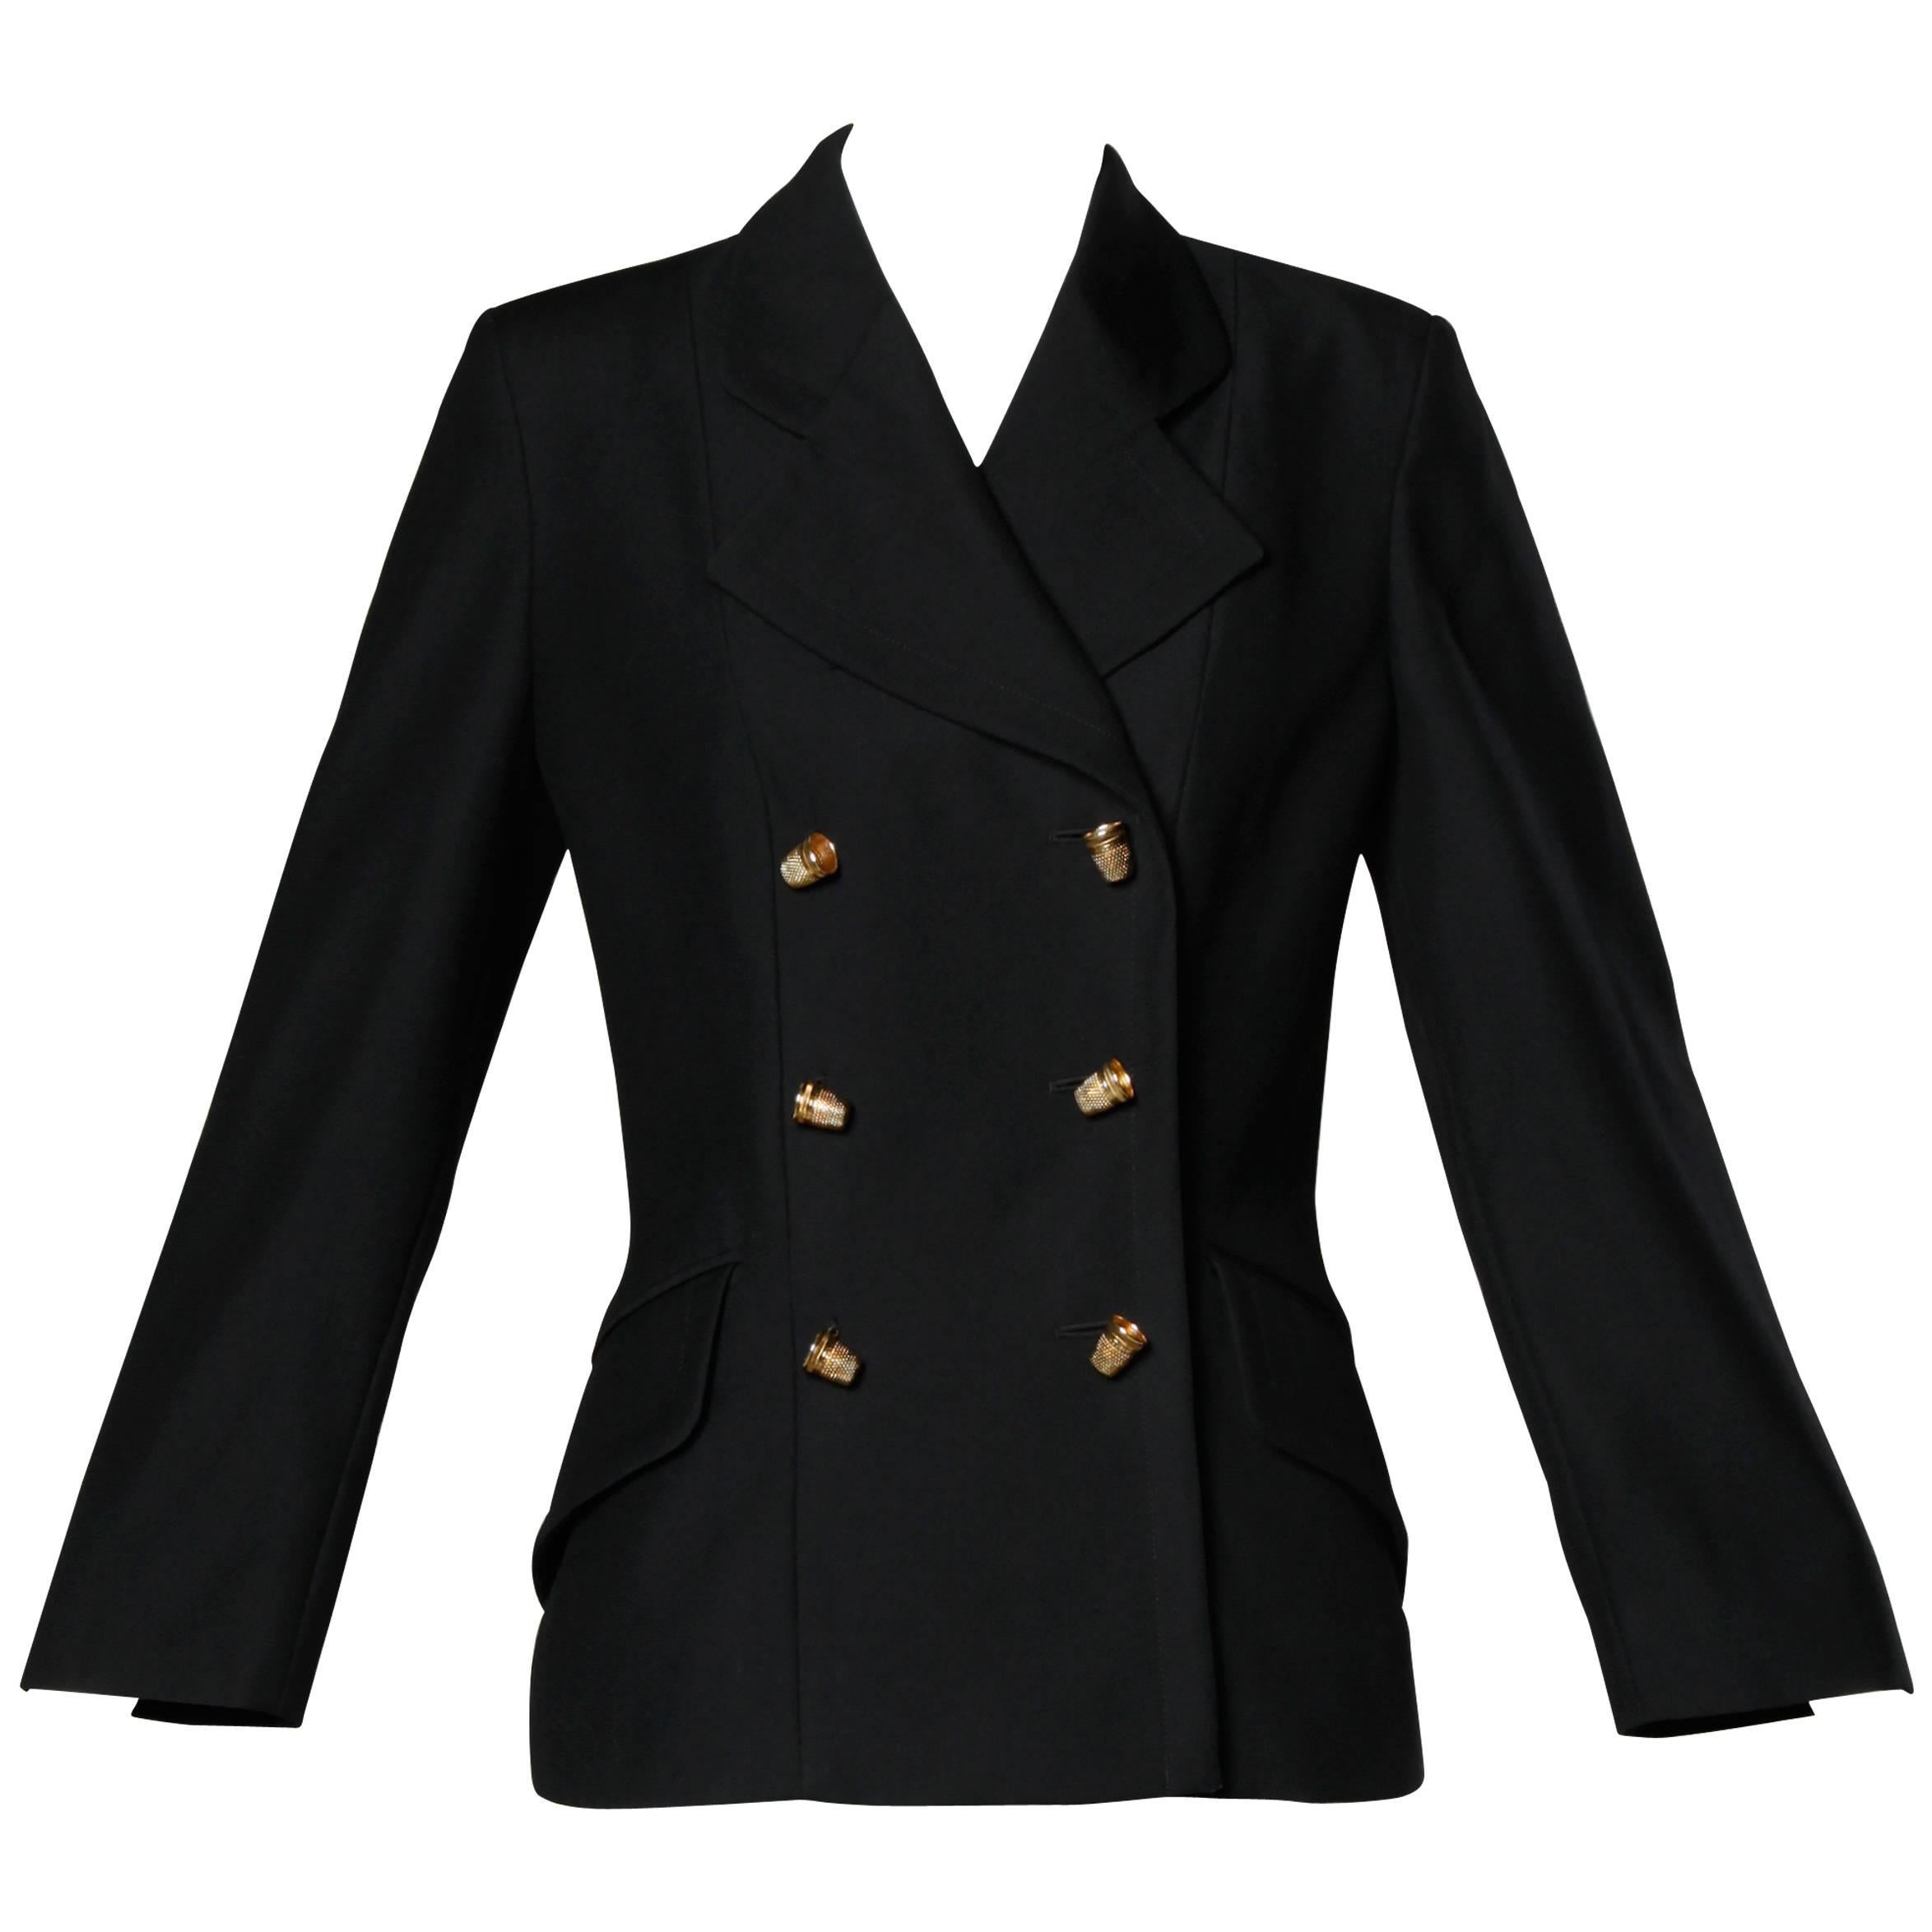 Moschino Vintage 90s Black Blazer Jacket with Novelty "Thimble" Buttons For Sale